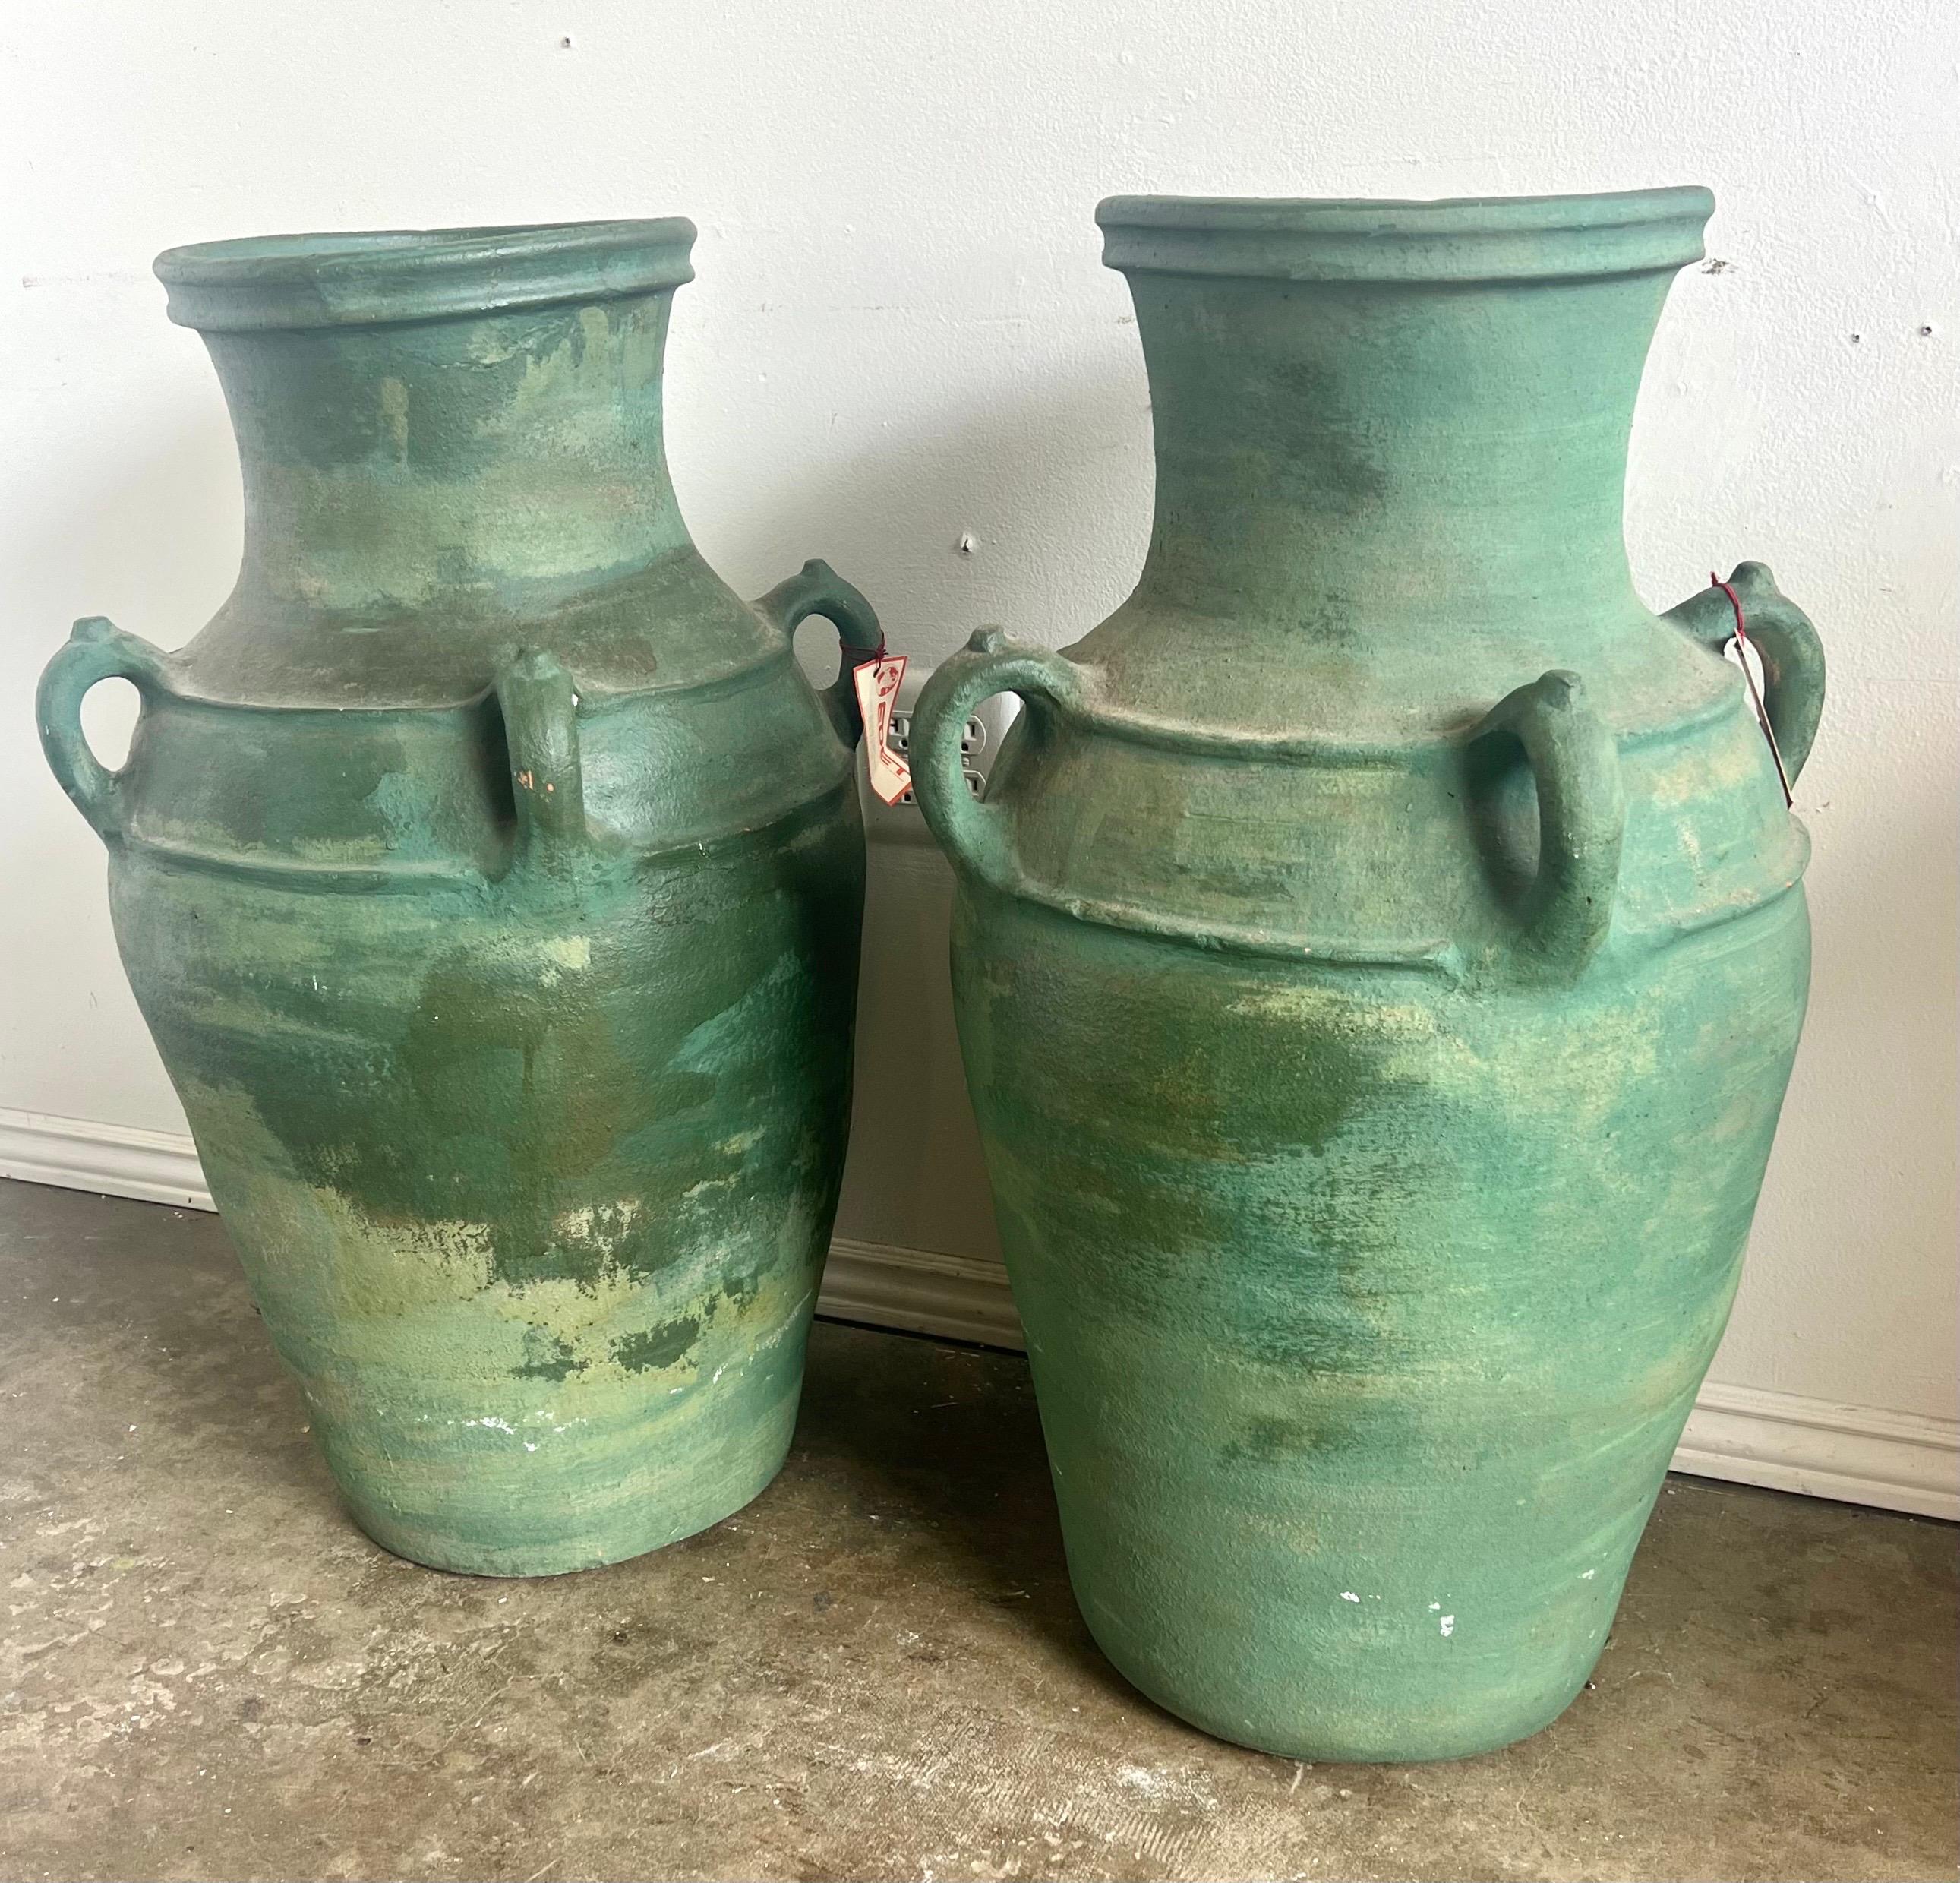 Pair of large ceramic urns, each with a robust, rounded body and a narrow, flared neck.  The urns are finished in a distressed green glaze that gives them a weathered, antique appearance.  Both urns are equipped with dual handles near the top. 